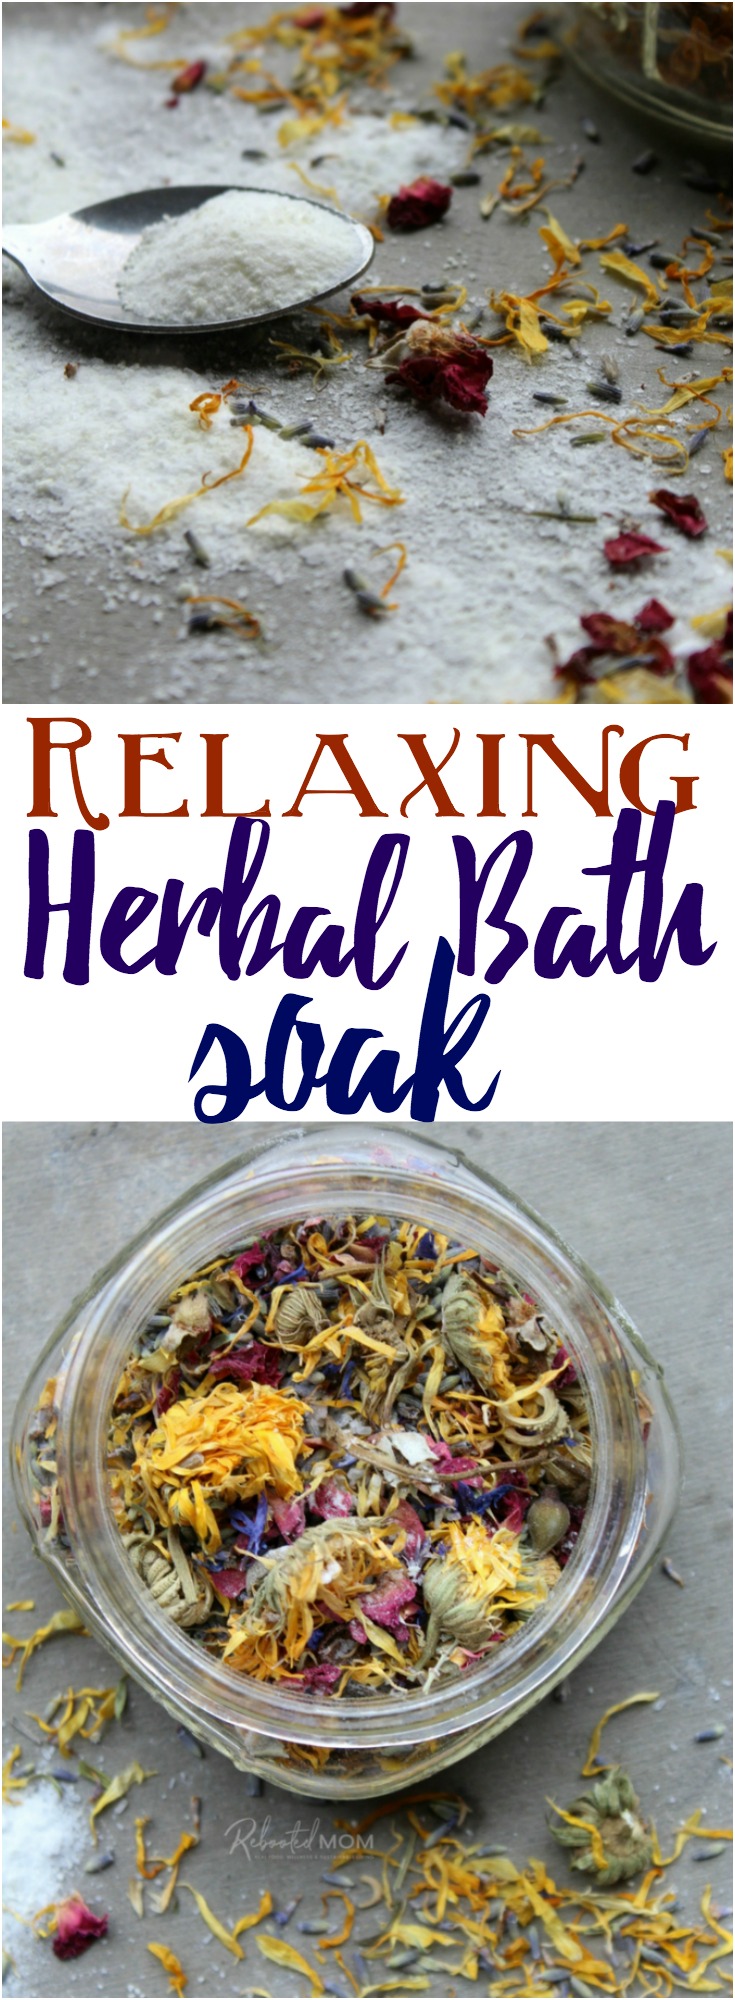 Looking for a way to relax after a long, hard day? This Relaxing Herbal Bath Soak will do the trick - perfect to use for yourself or as a homemade gift! #healthyrecipes #selfcare #homemadegifts #bathsalts #essentialoils #giftideas 